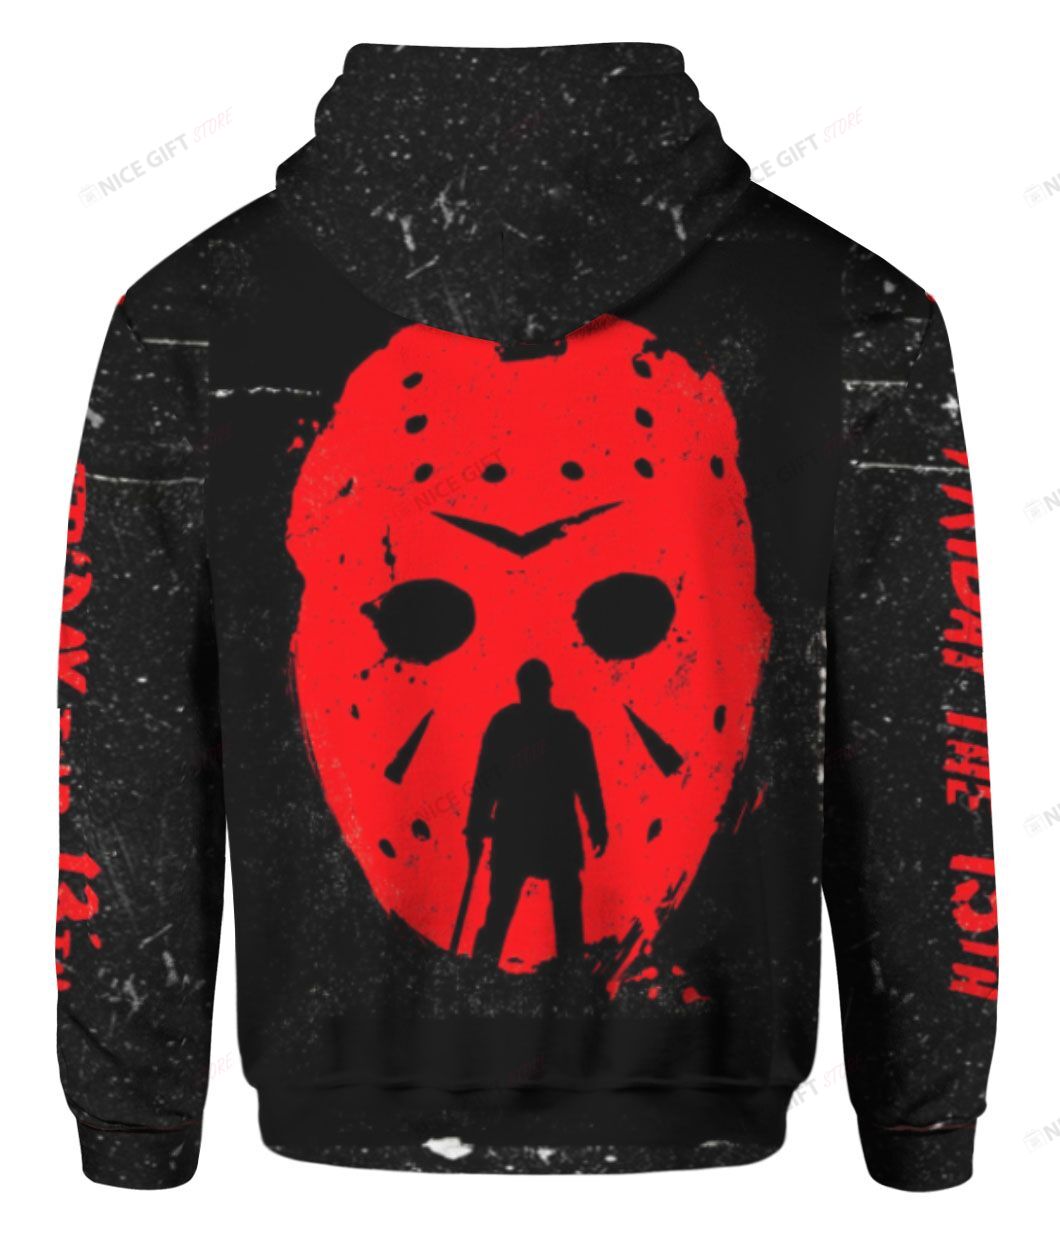 Friday 13th Hoodie 3D 3HO-A0K6 - HomeFavo